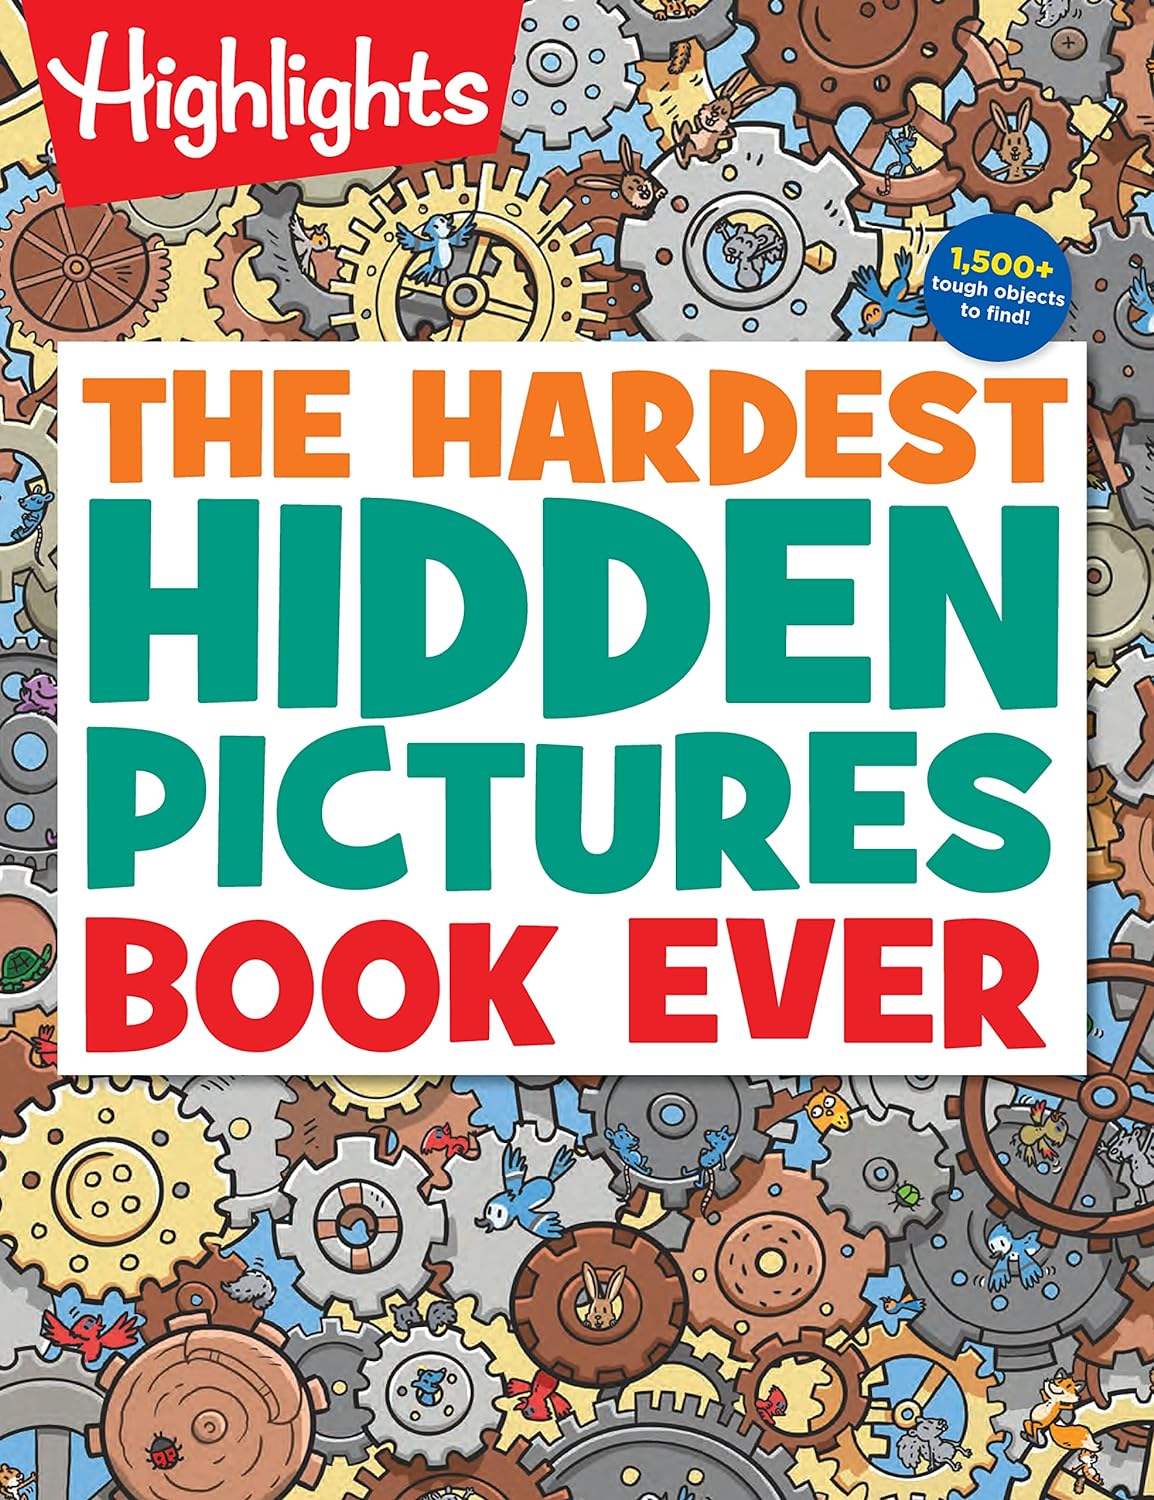 Highlights The Hardest Hidden Pictures Book Ever